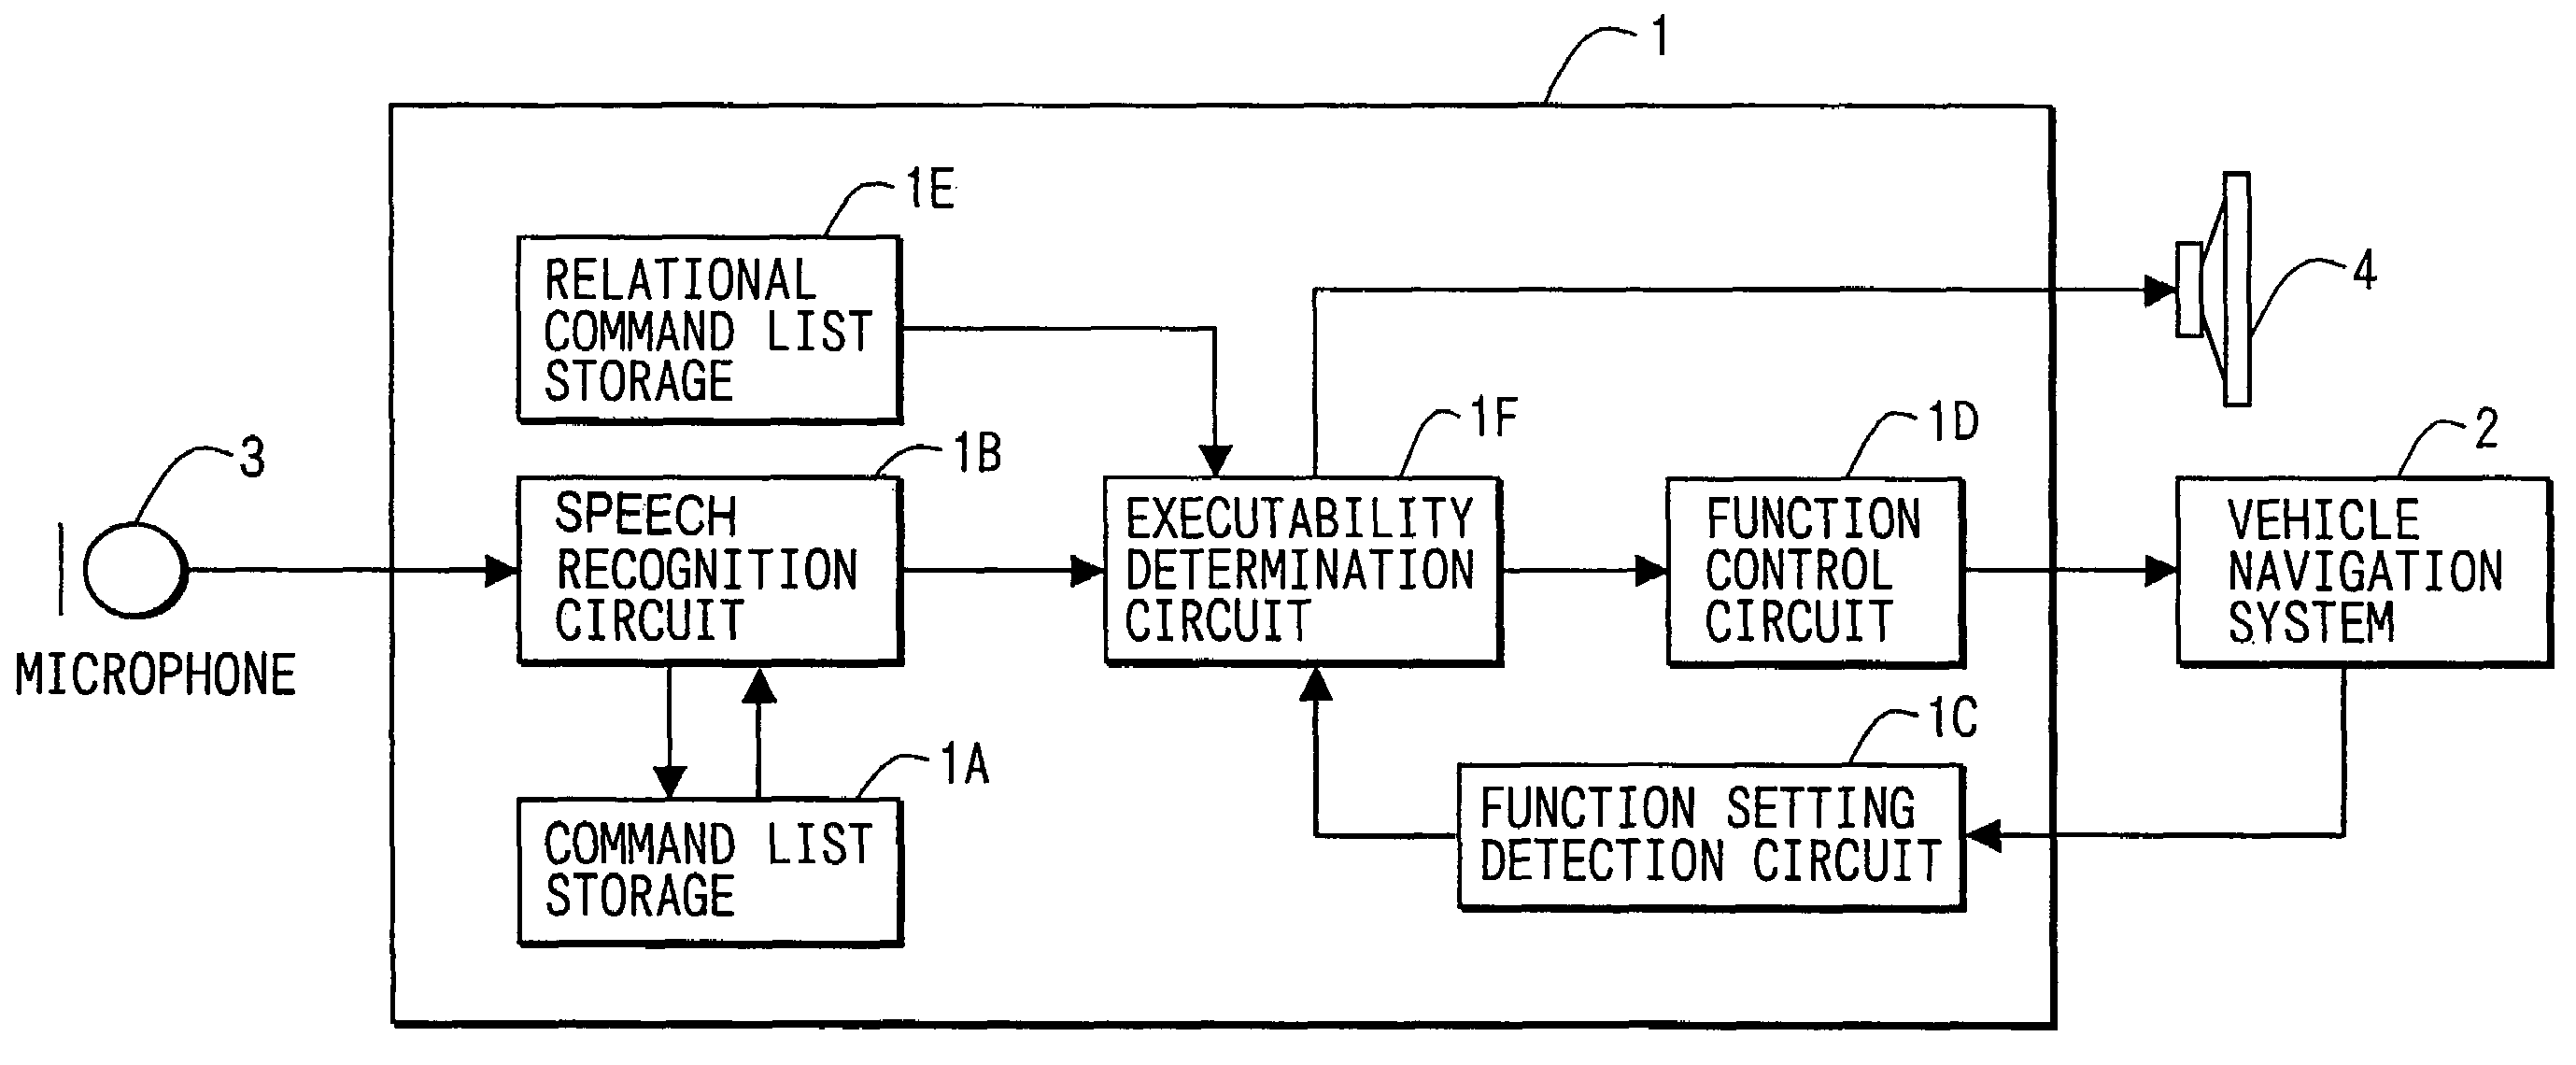 Voice control system